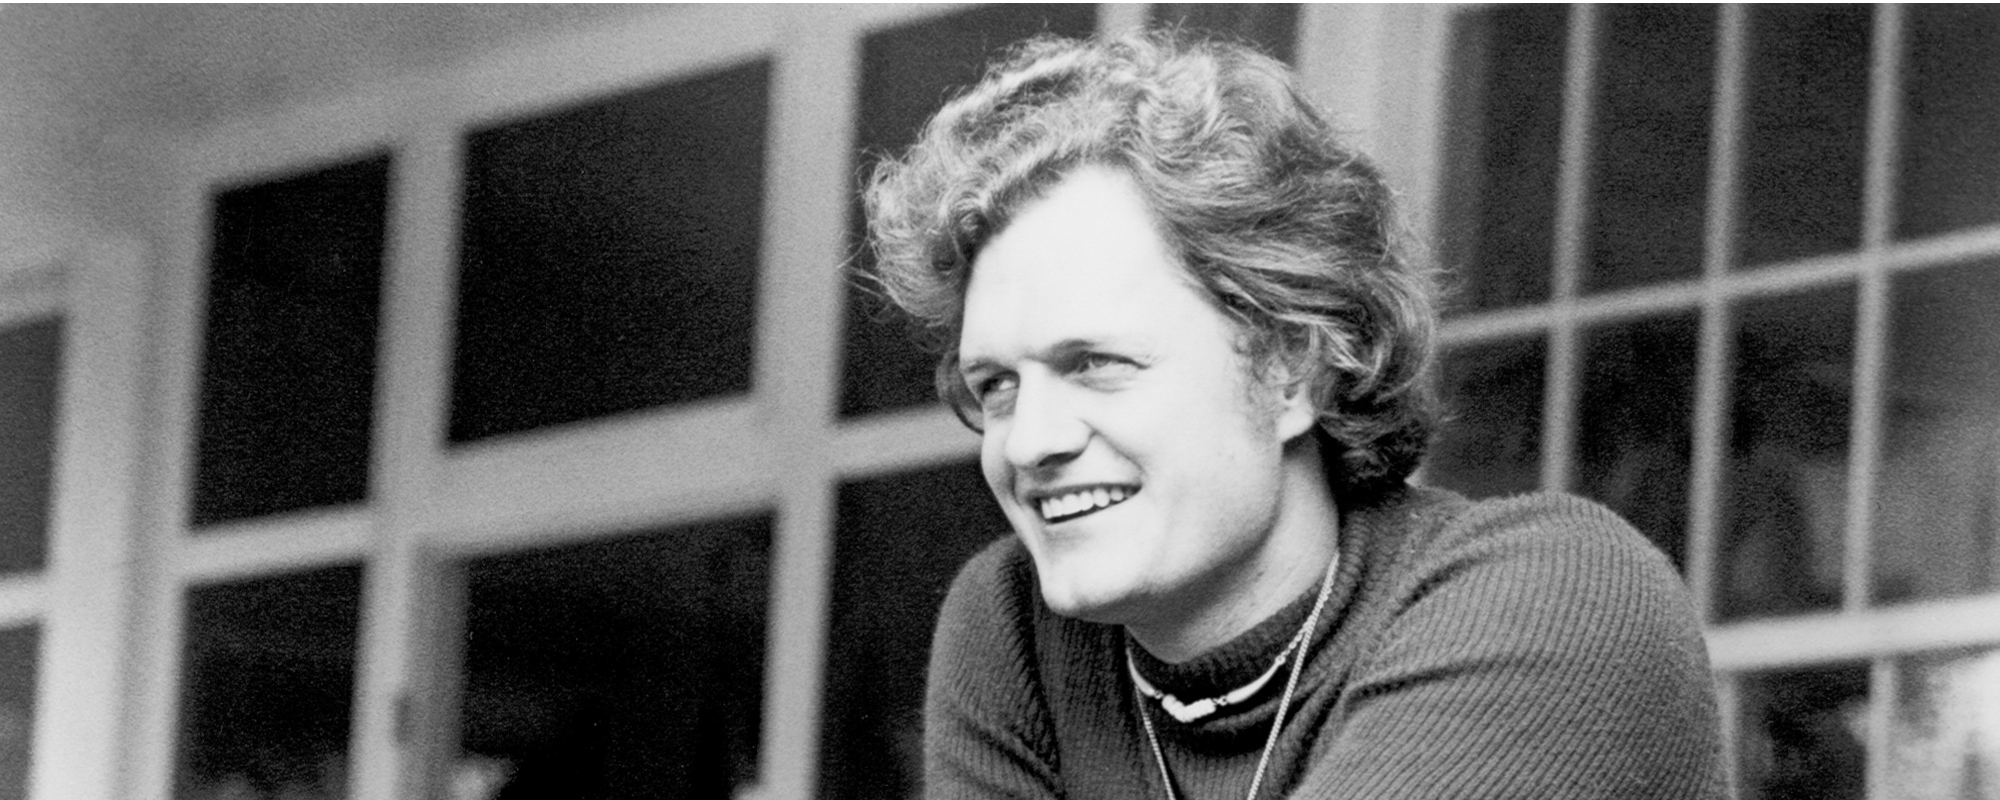 The Meaning Behind “Cats in the Cradle” by Harry Chapin